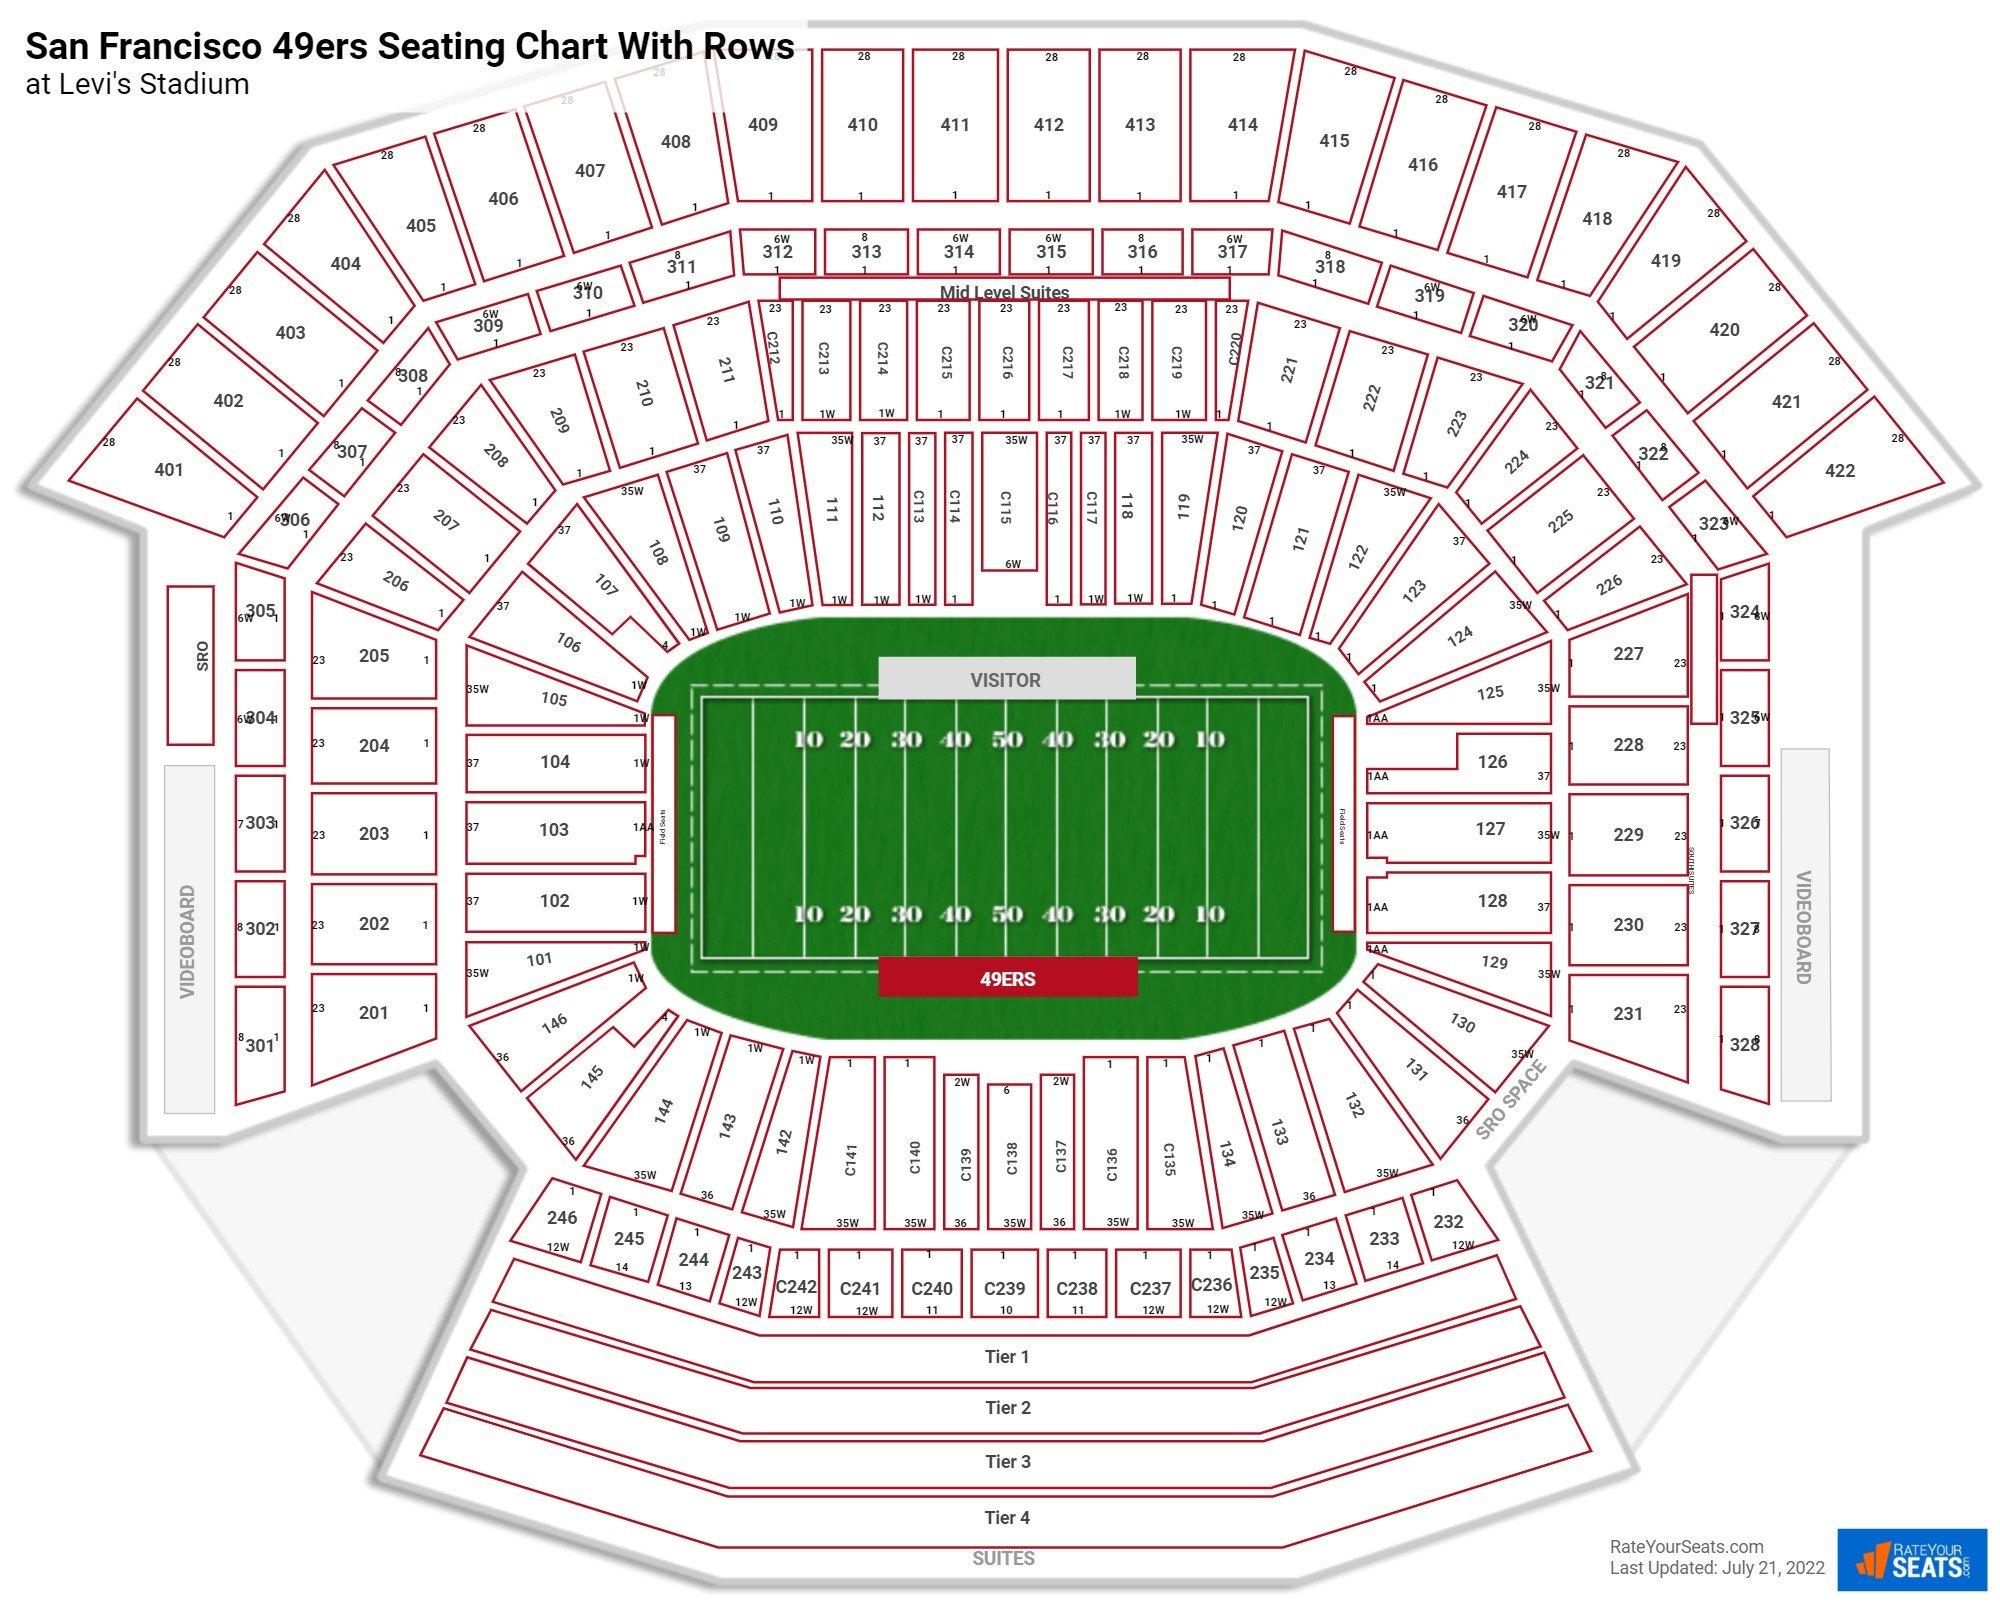 Levi's Stadium Seating Chart With Row Numbers.